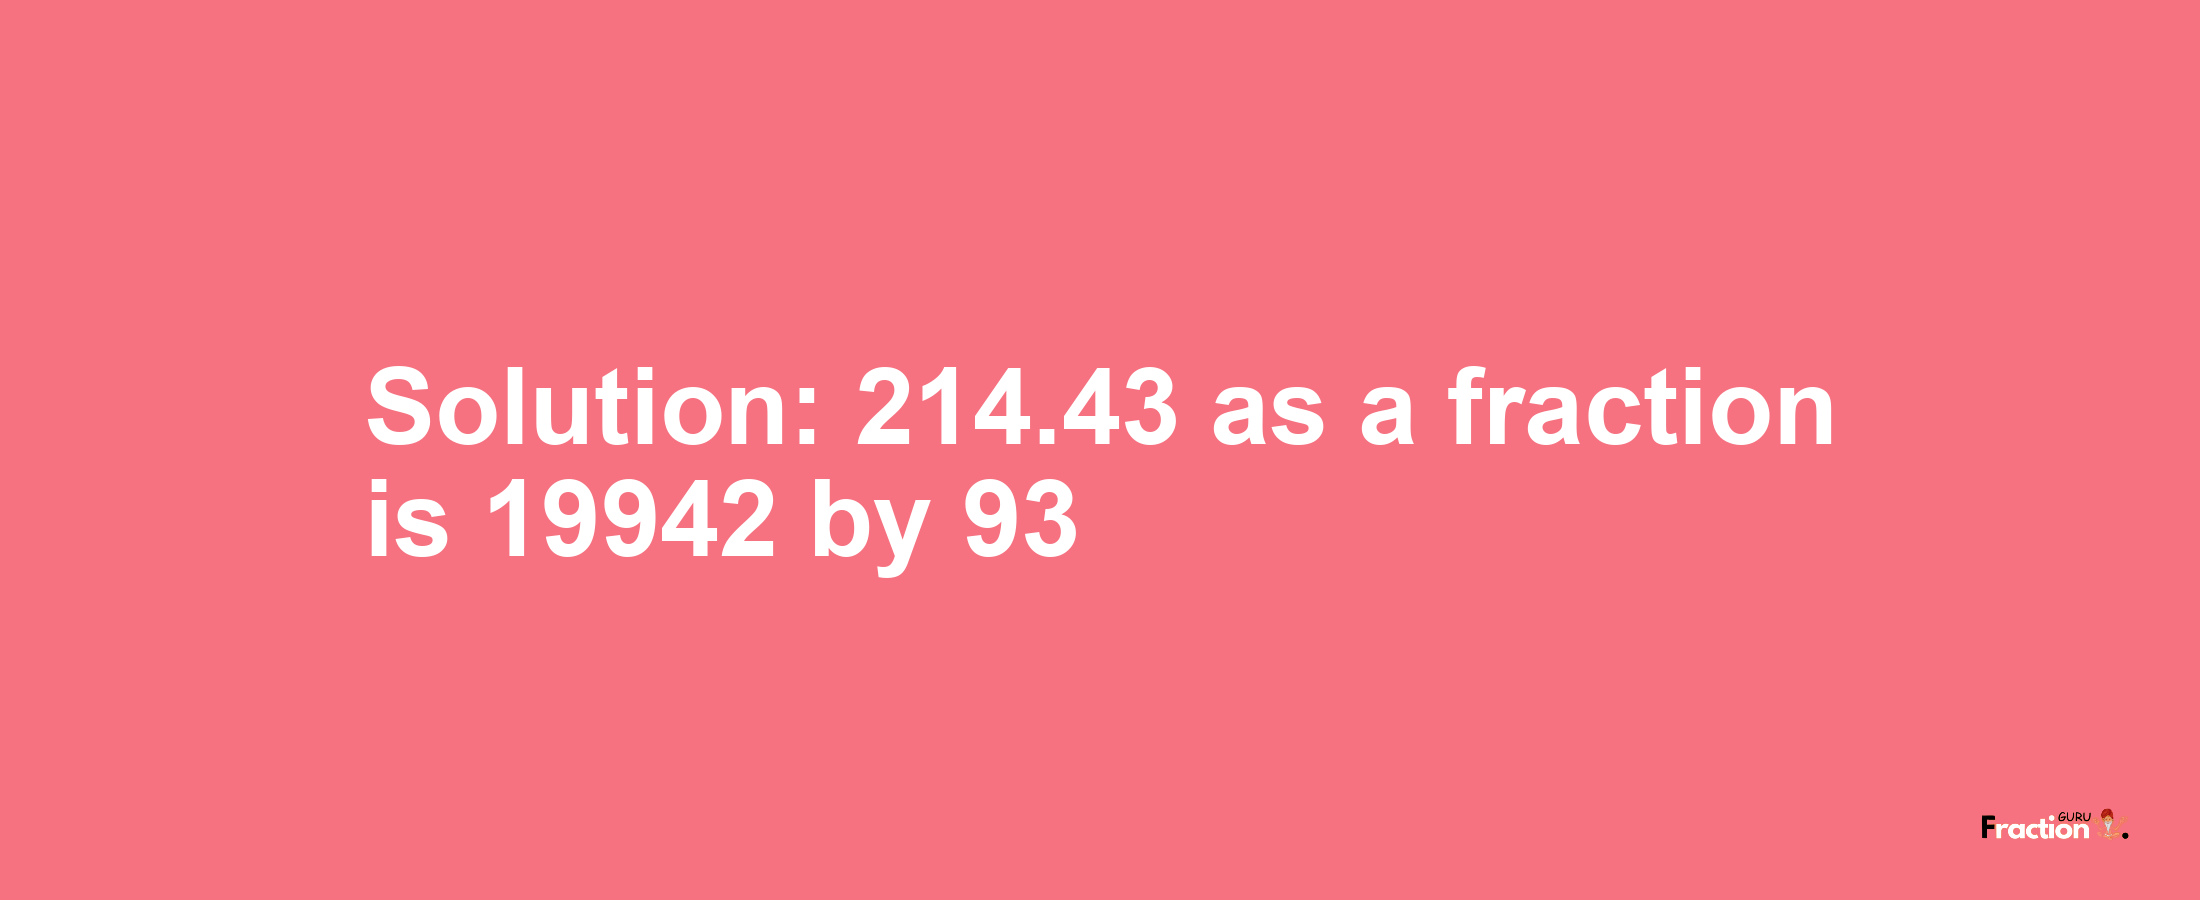 Solution:214.43 as a fraction is 19942/93